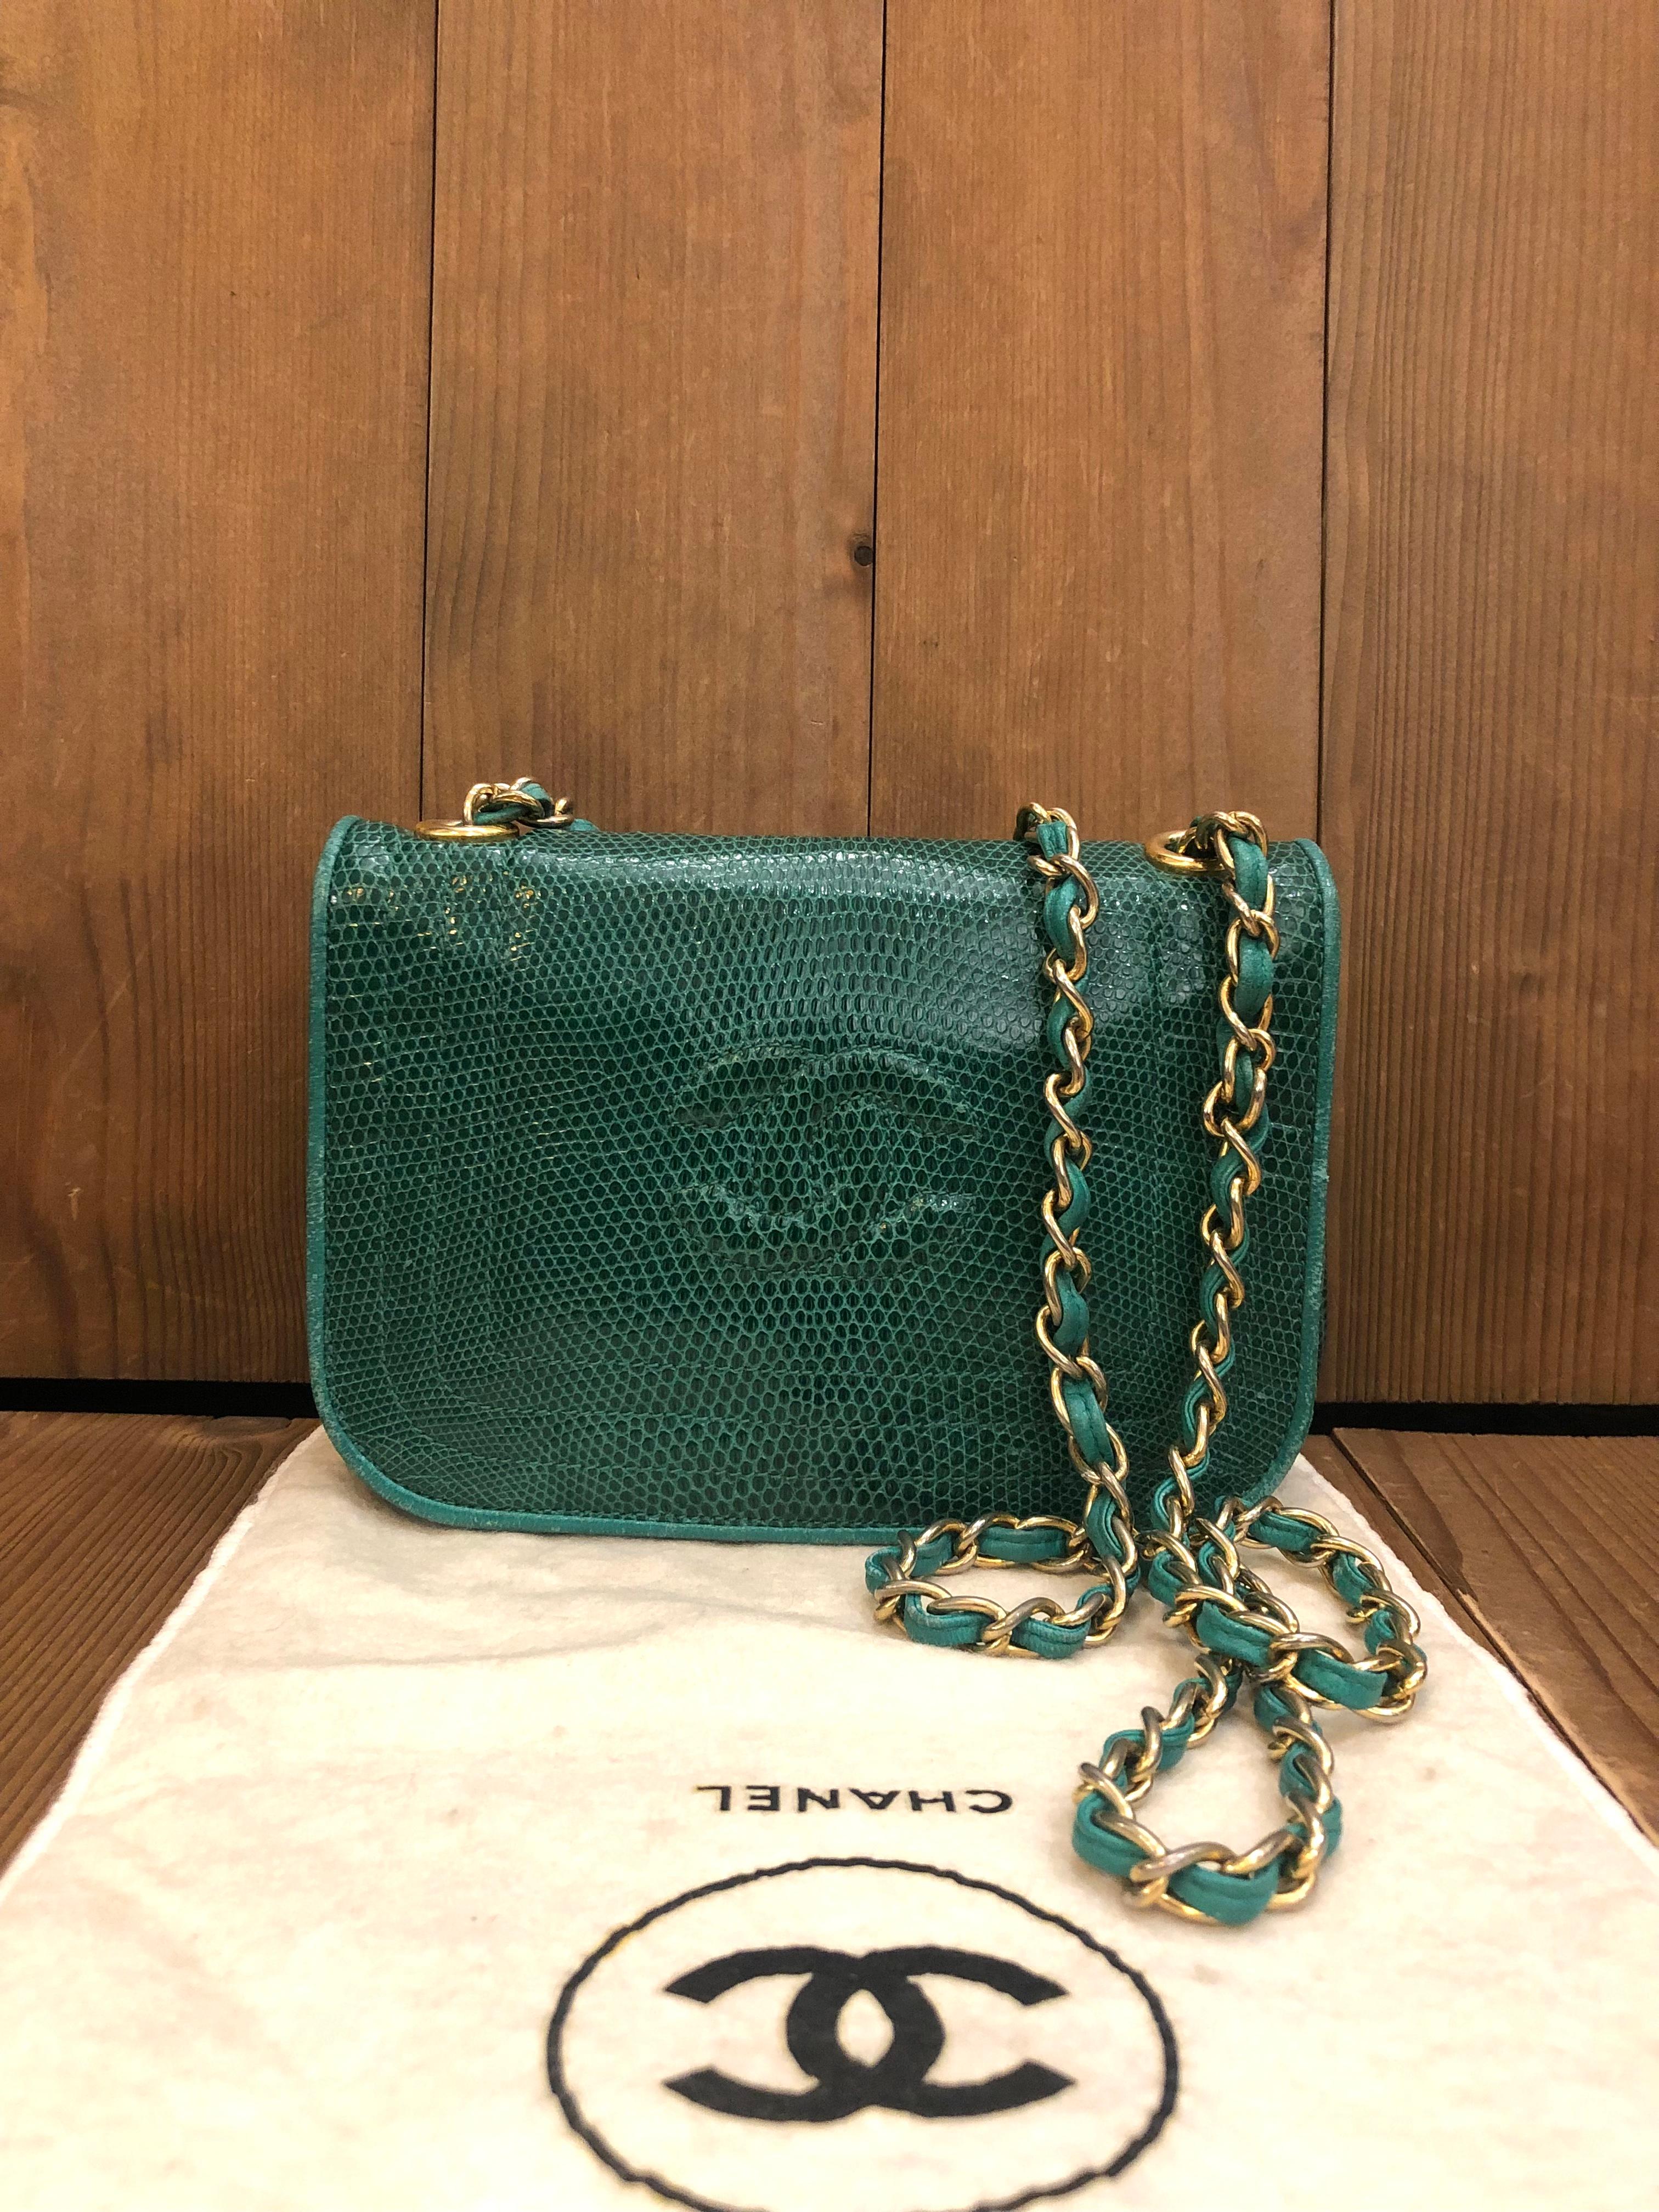 This vintage CHANEL mini flap bag is crafted of lizard skin leather in emerald green centered an embossed CC logo. This flap bag features a gold toned chain interlaced with green lambskin leather. Front flap magnetic snap closure opens to a lambskin